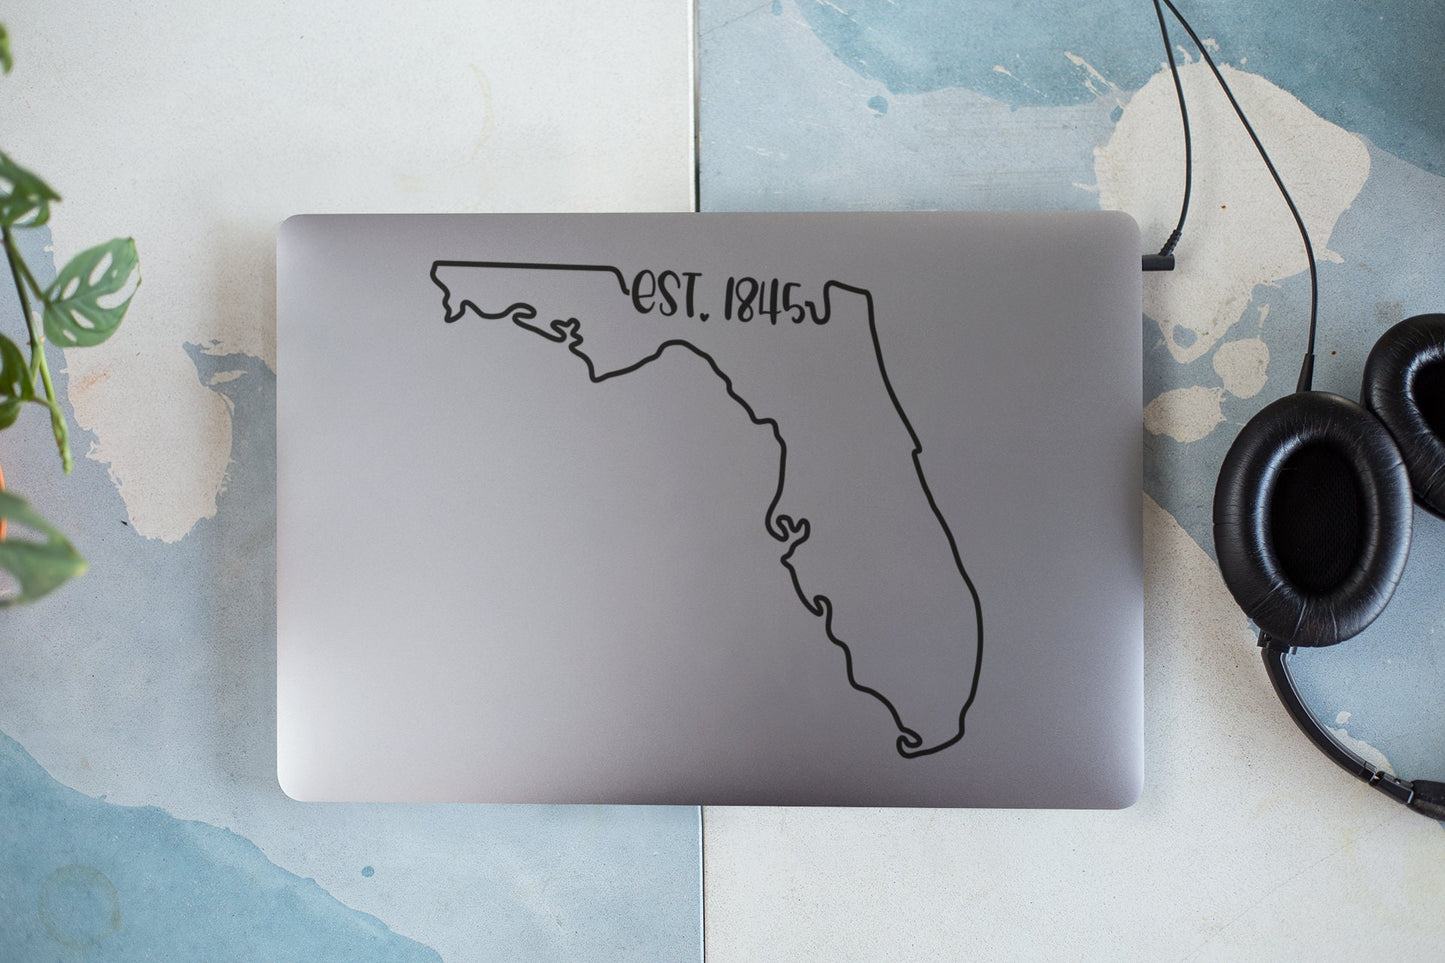 Florida EST. 1845 Decal - Many Colors & Sizes